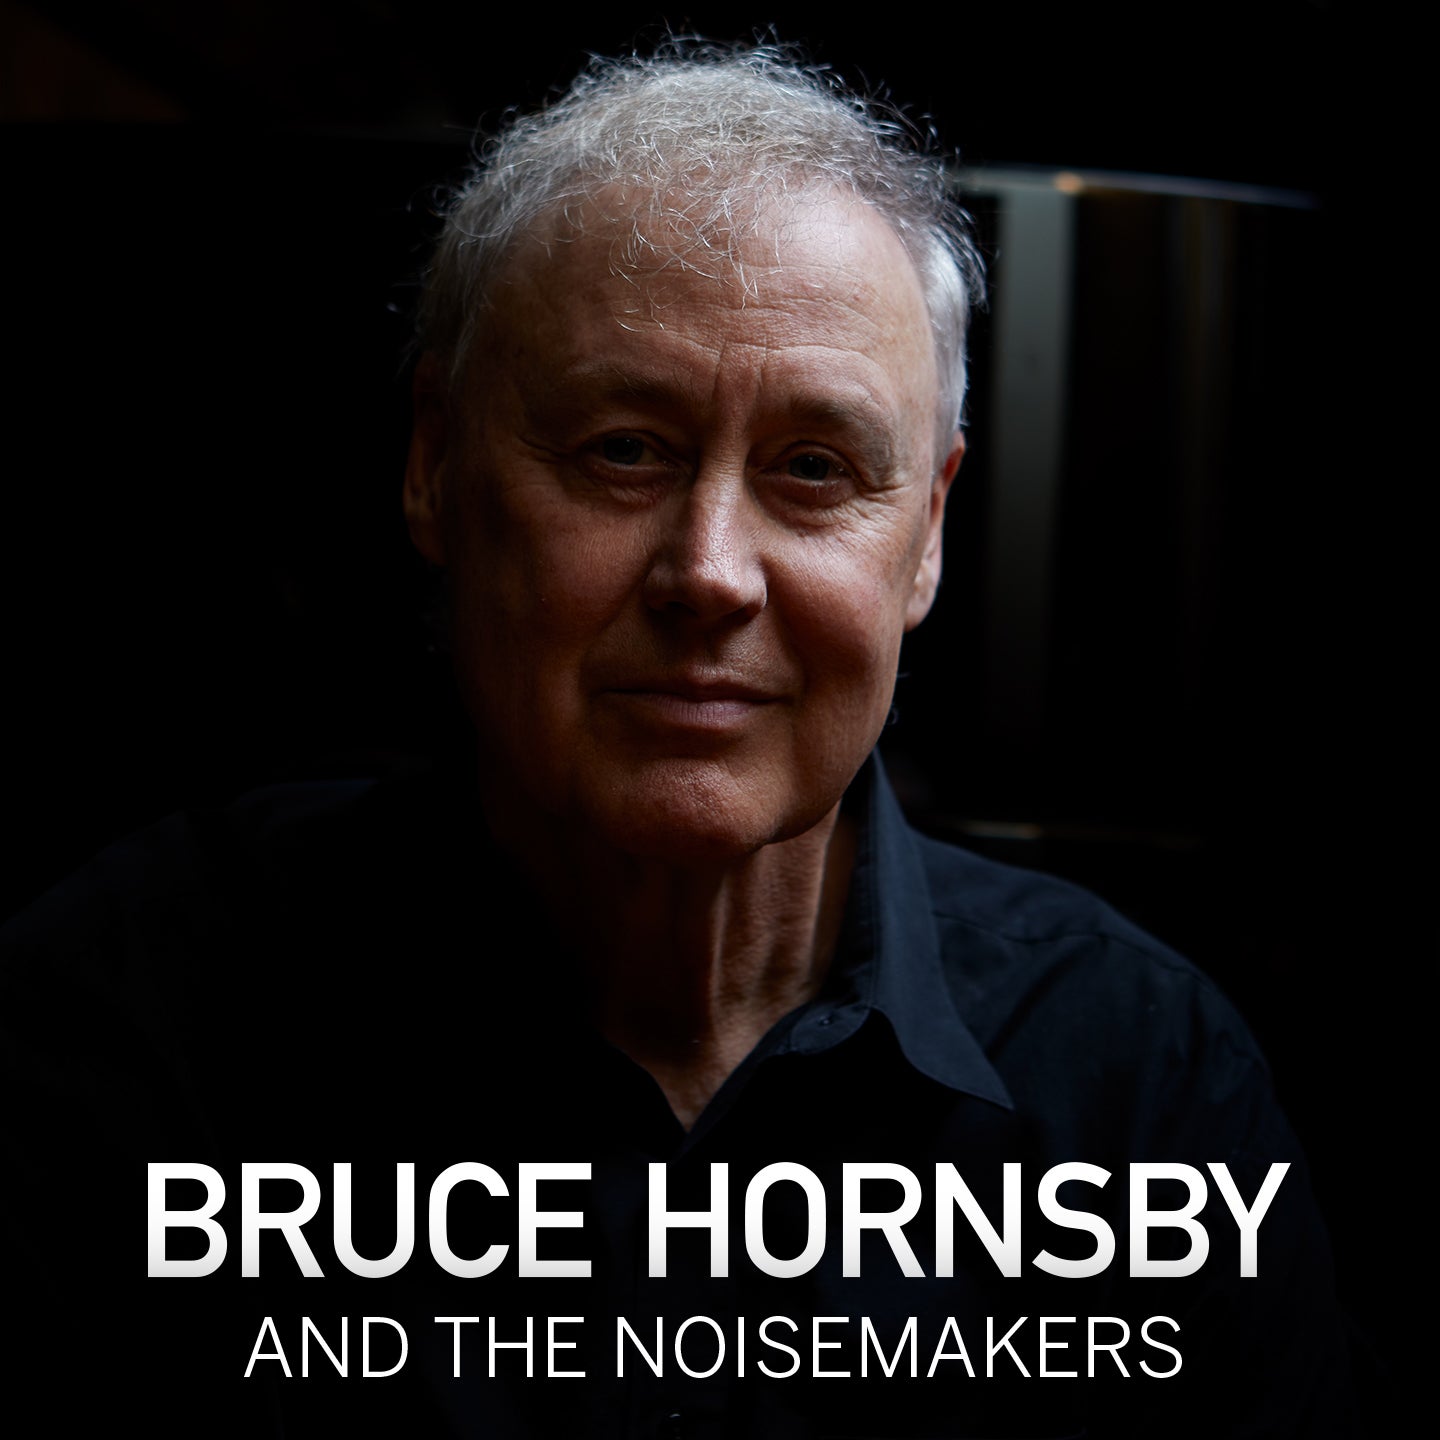 Bruce Hornsby and The Noisemakers